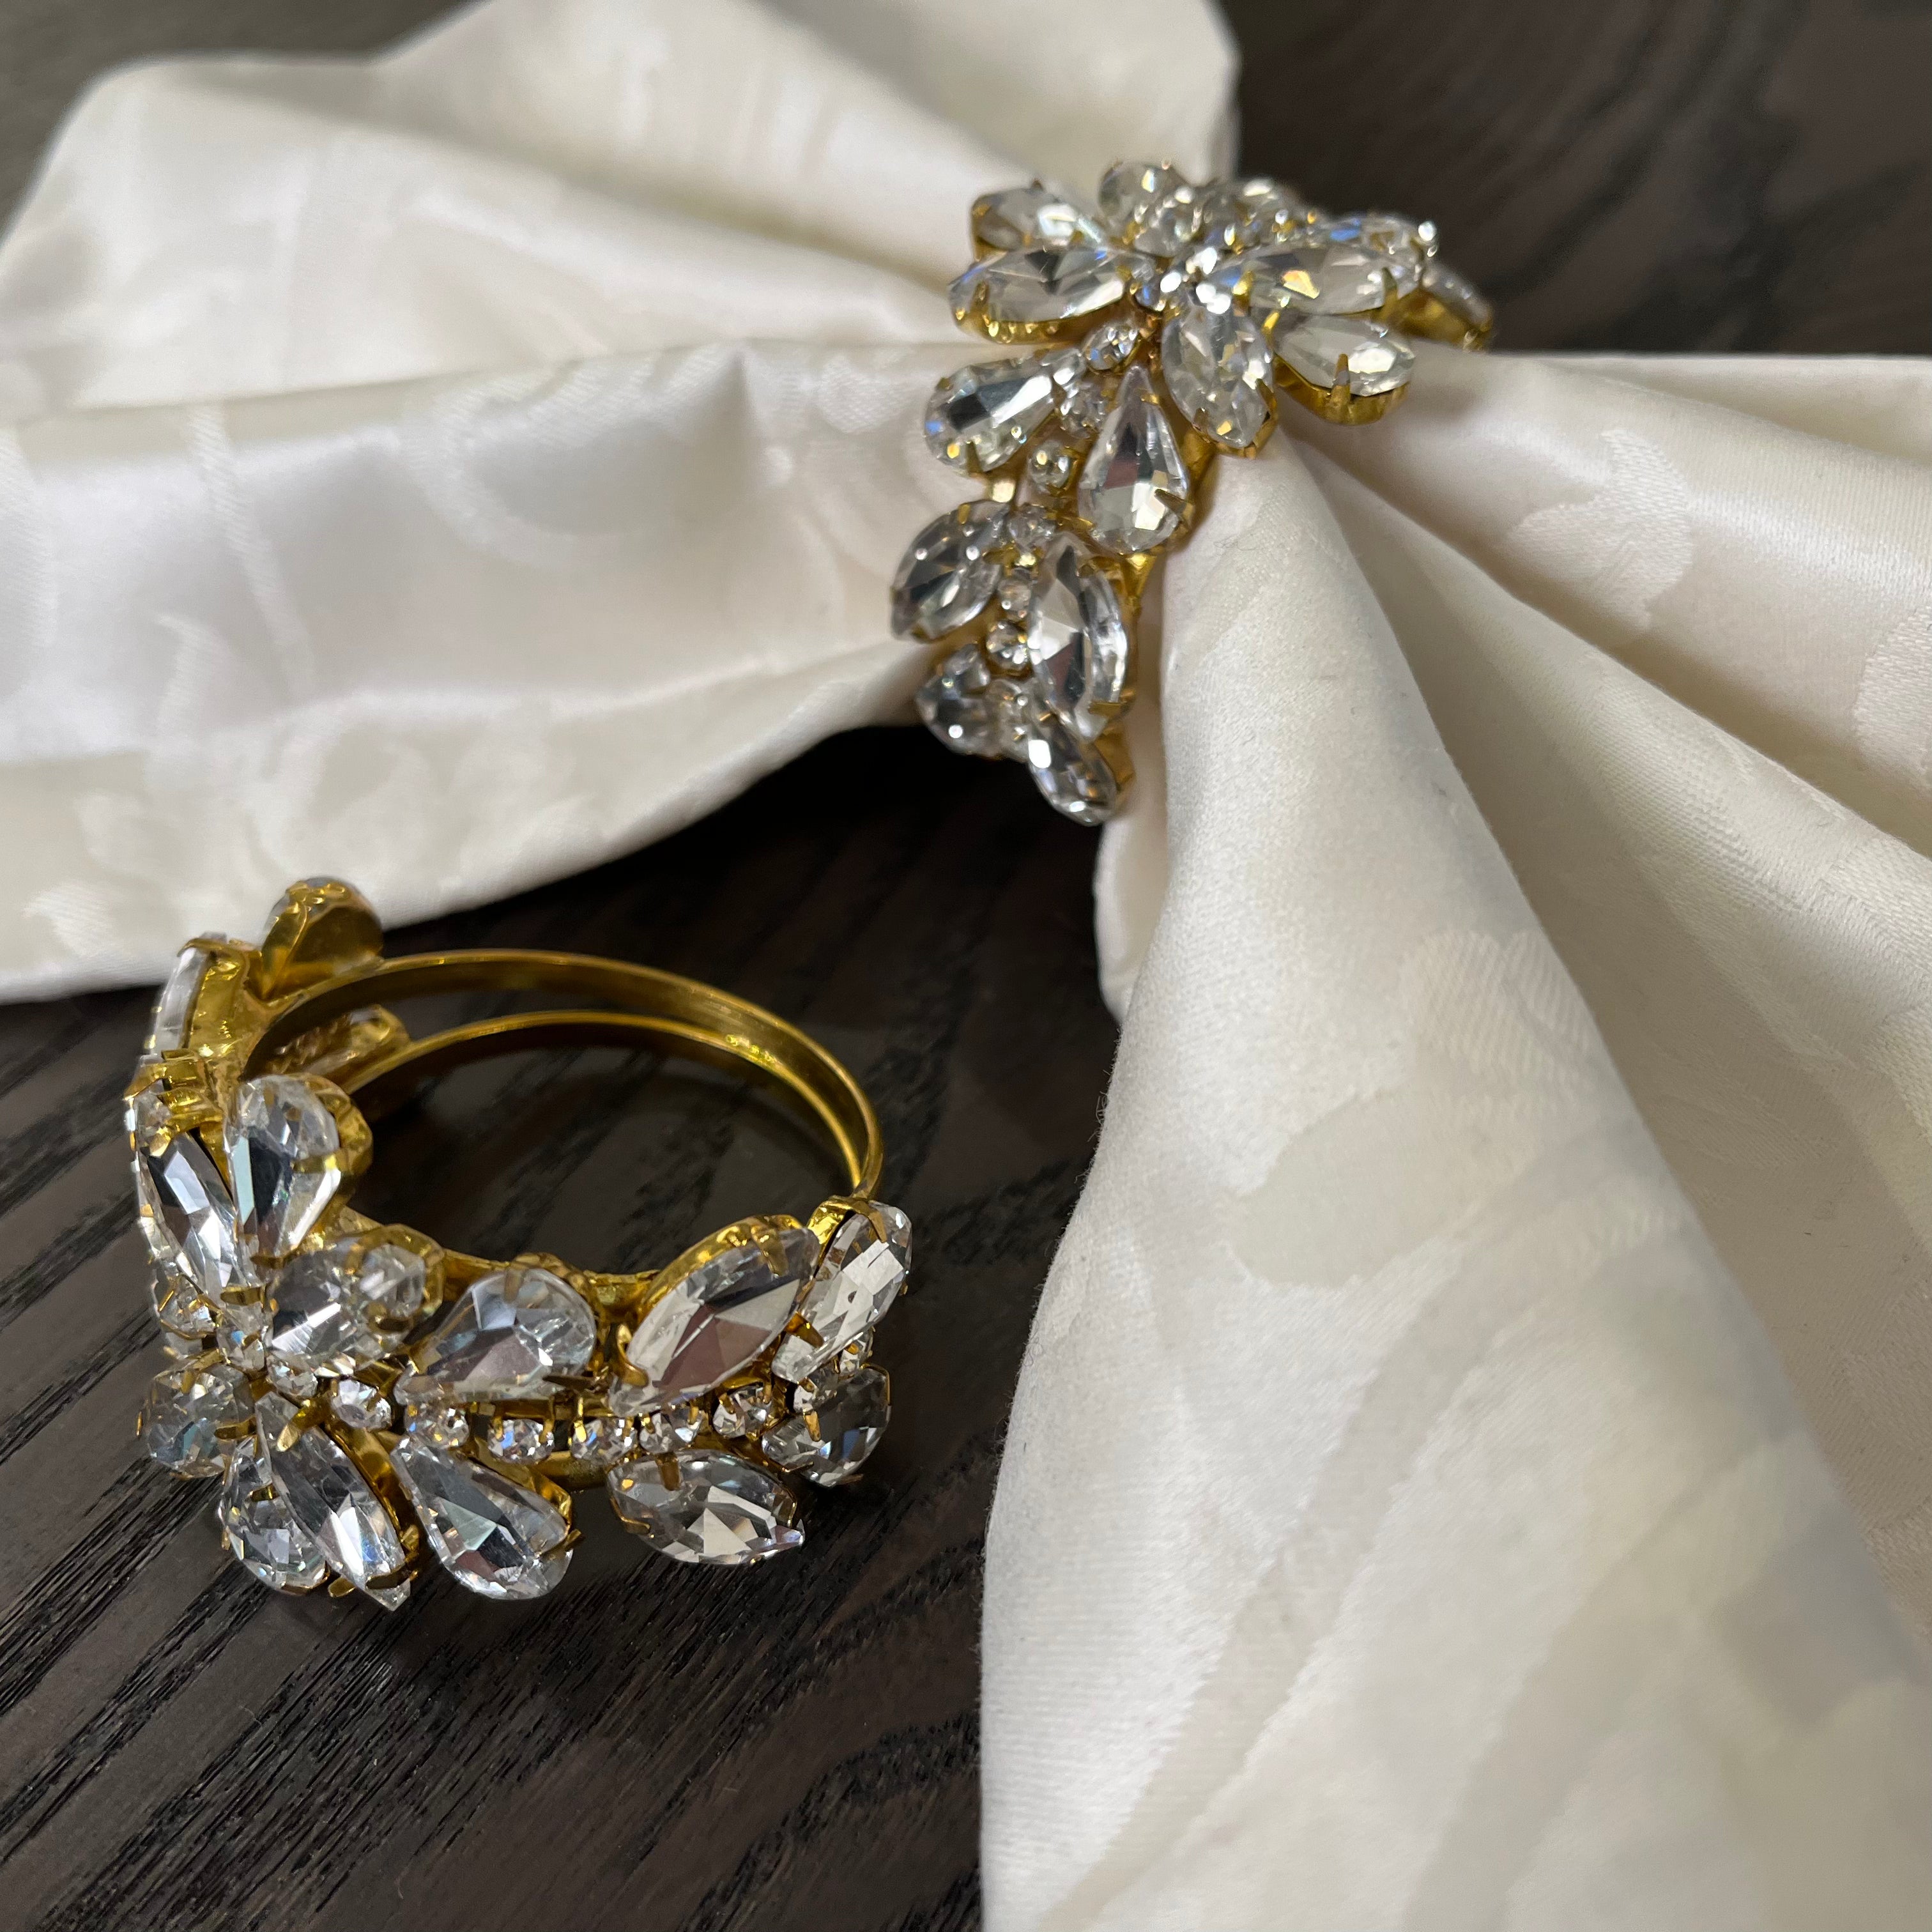 "GIGLIO" Crystal Napkins ring